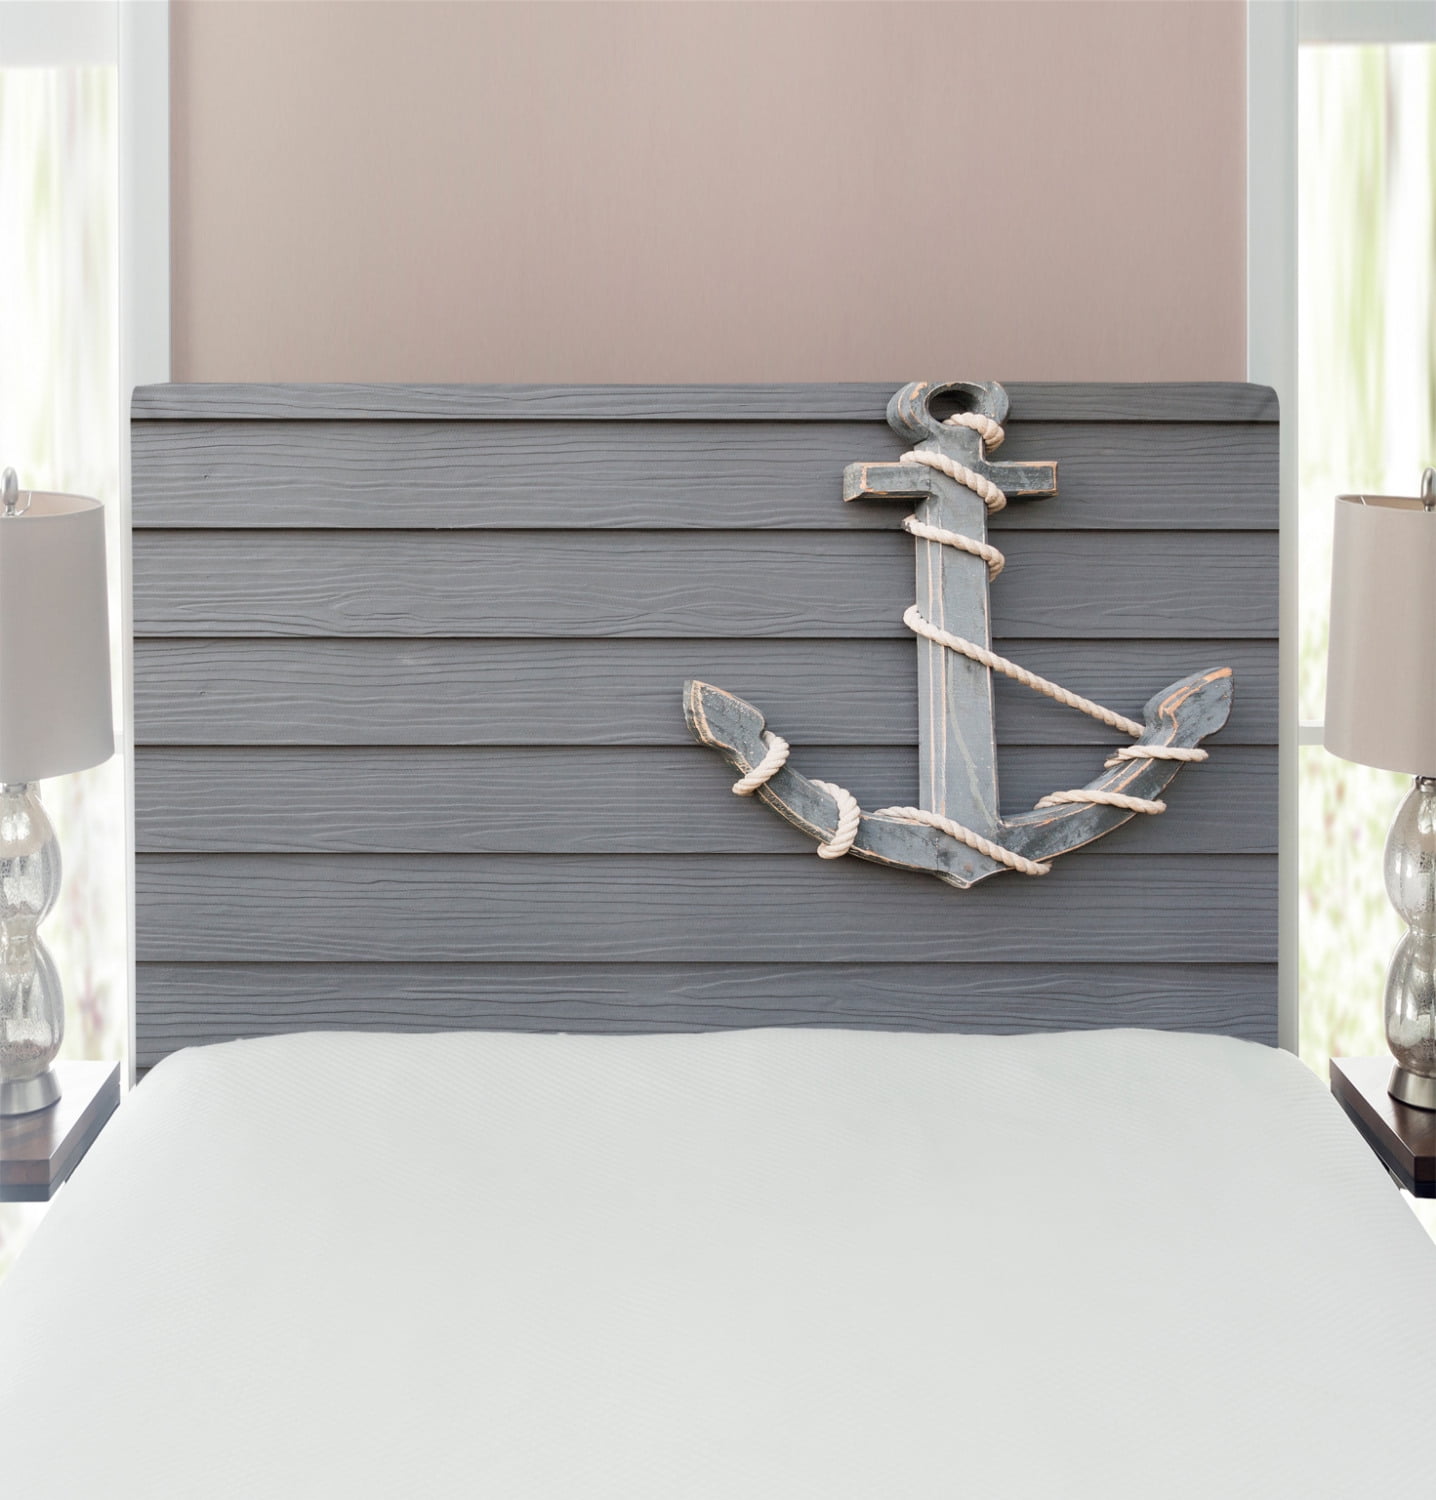 Anchor Headboard Wooden Marine Rope On, How To Bolt A Metal Headboard The Wall